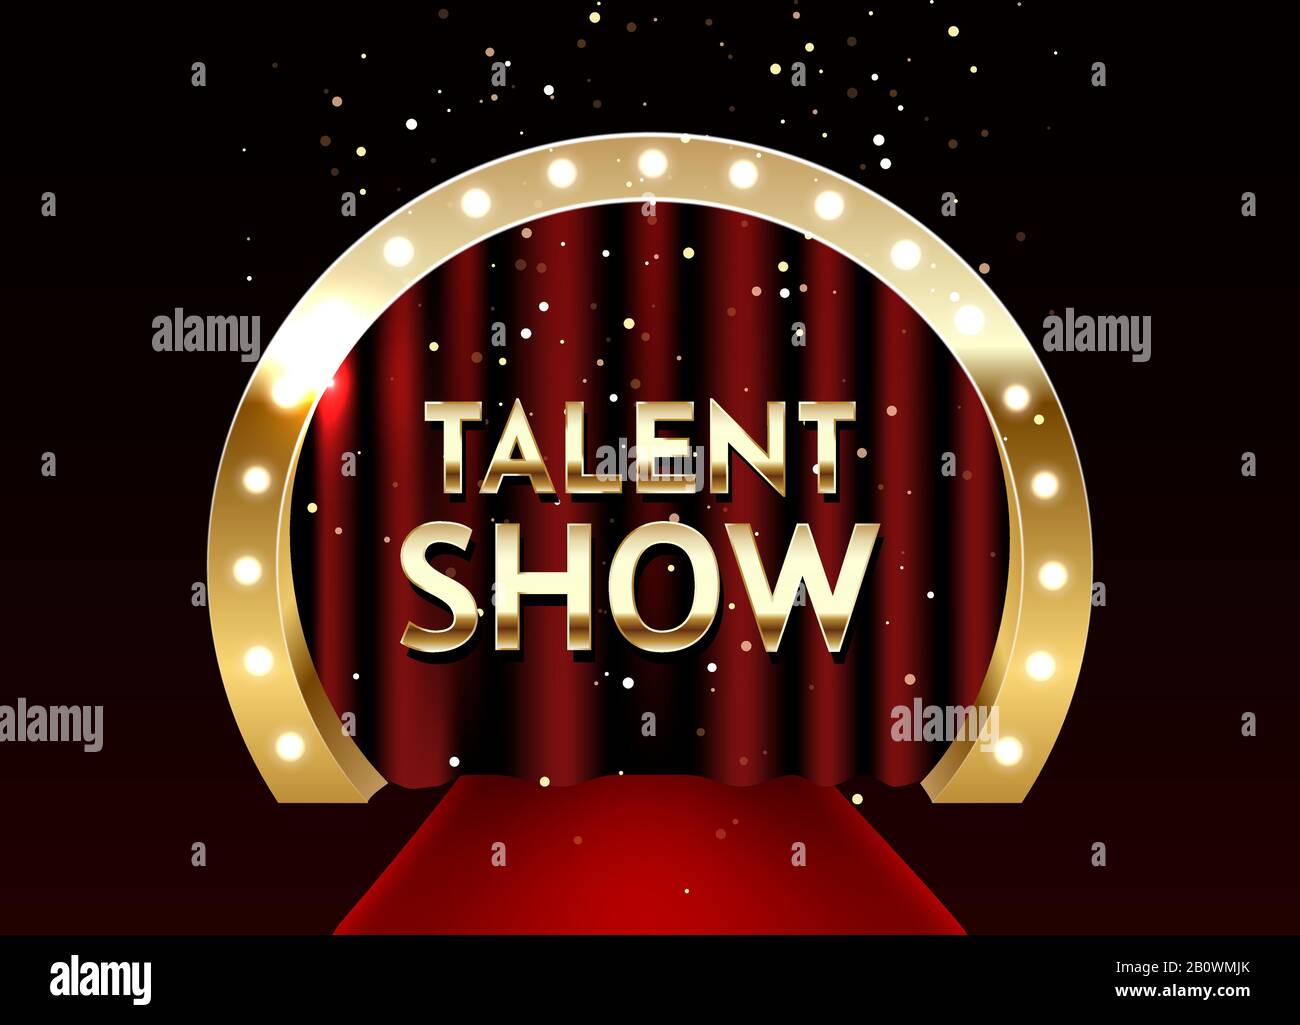 Talent show vector poster template. Empty theatrical stage with Talent show signage with lights on red curtain and seats for spectators. Stock Vector